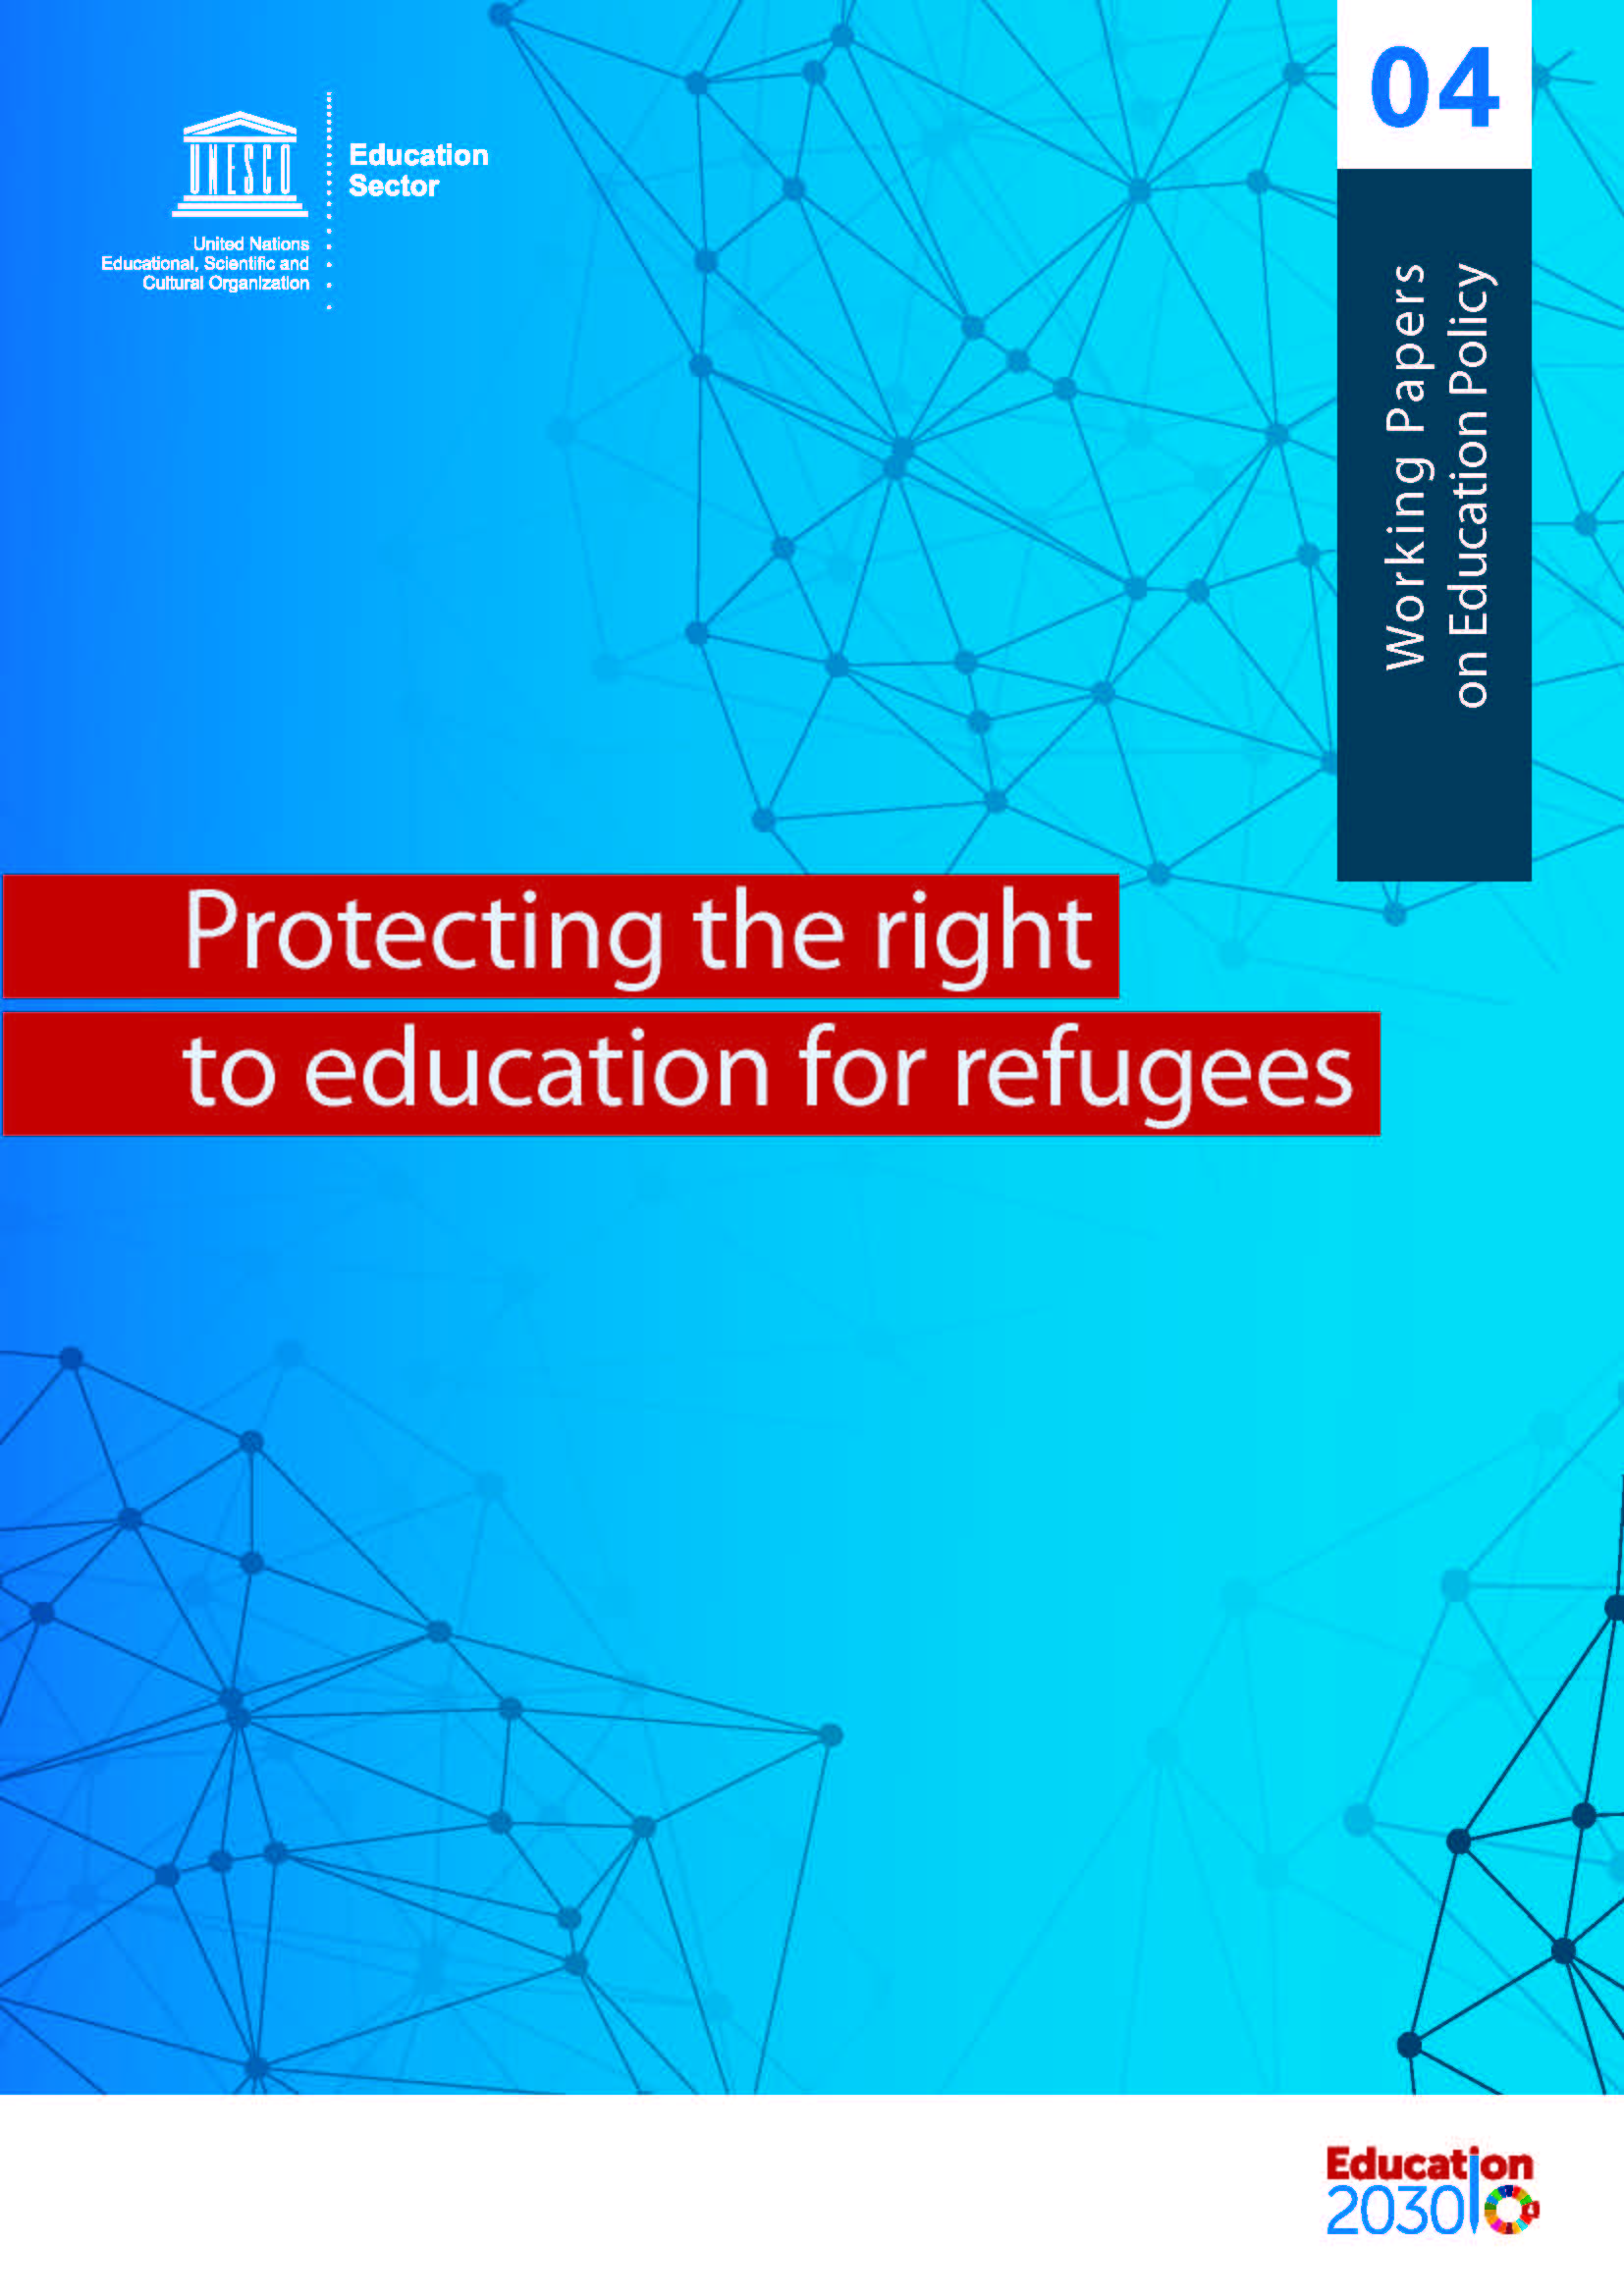 Protecting the right to education for refugees